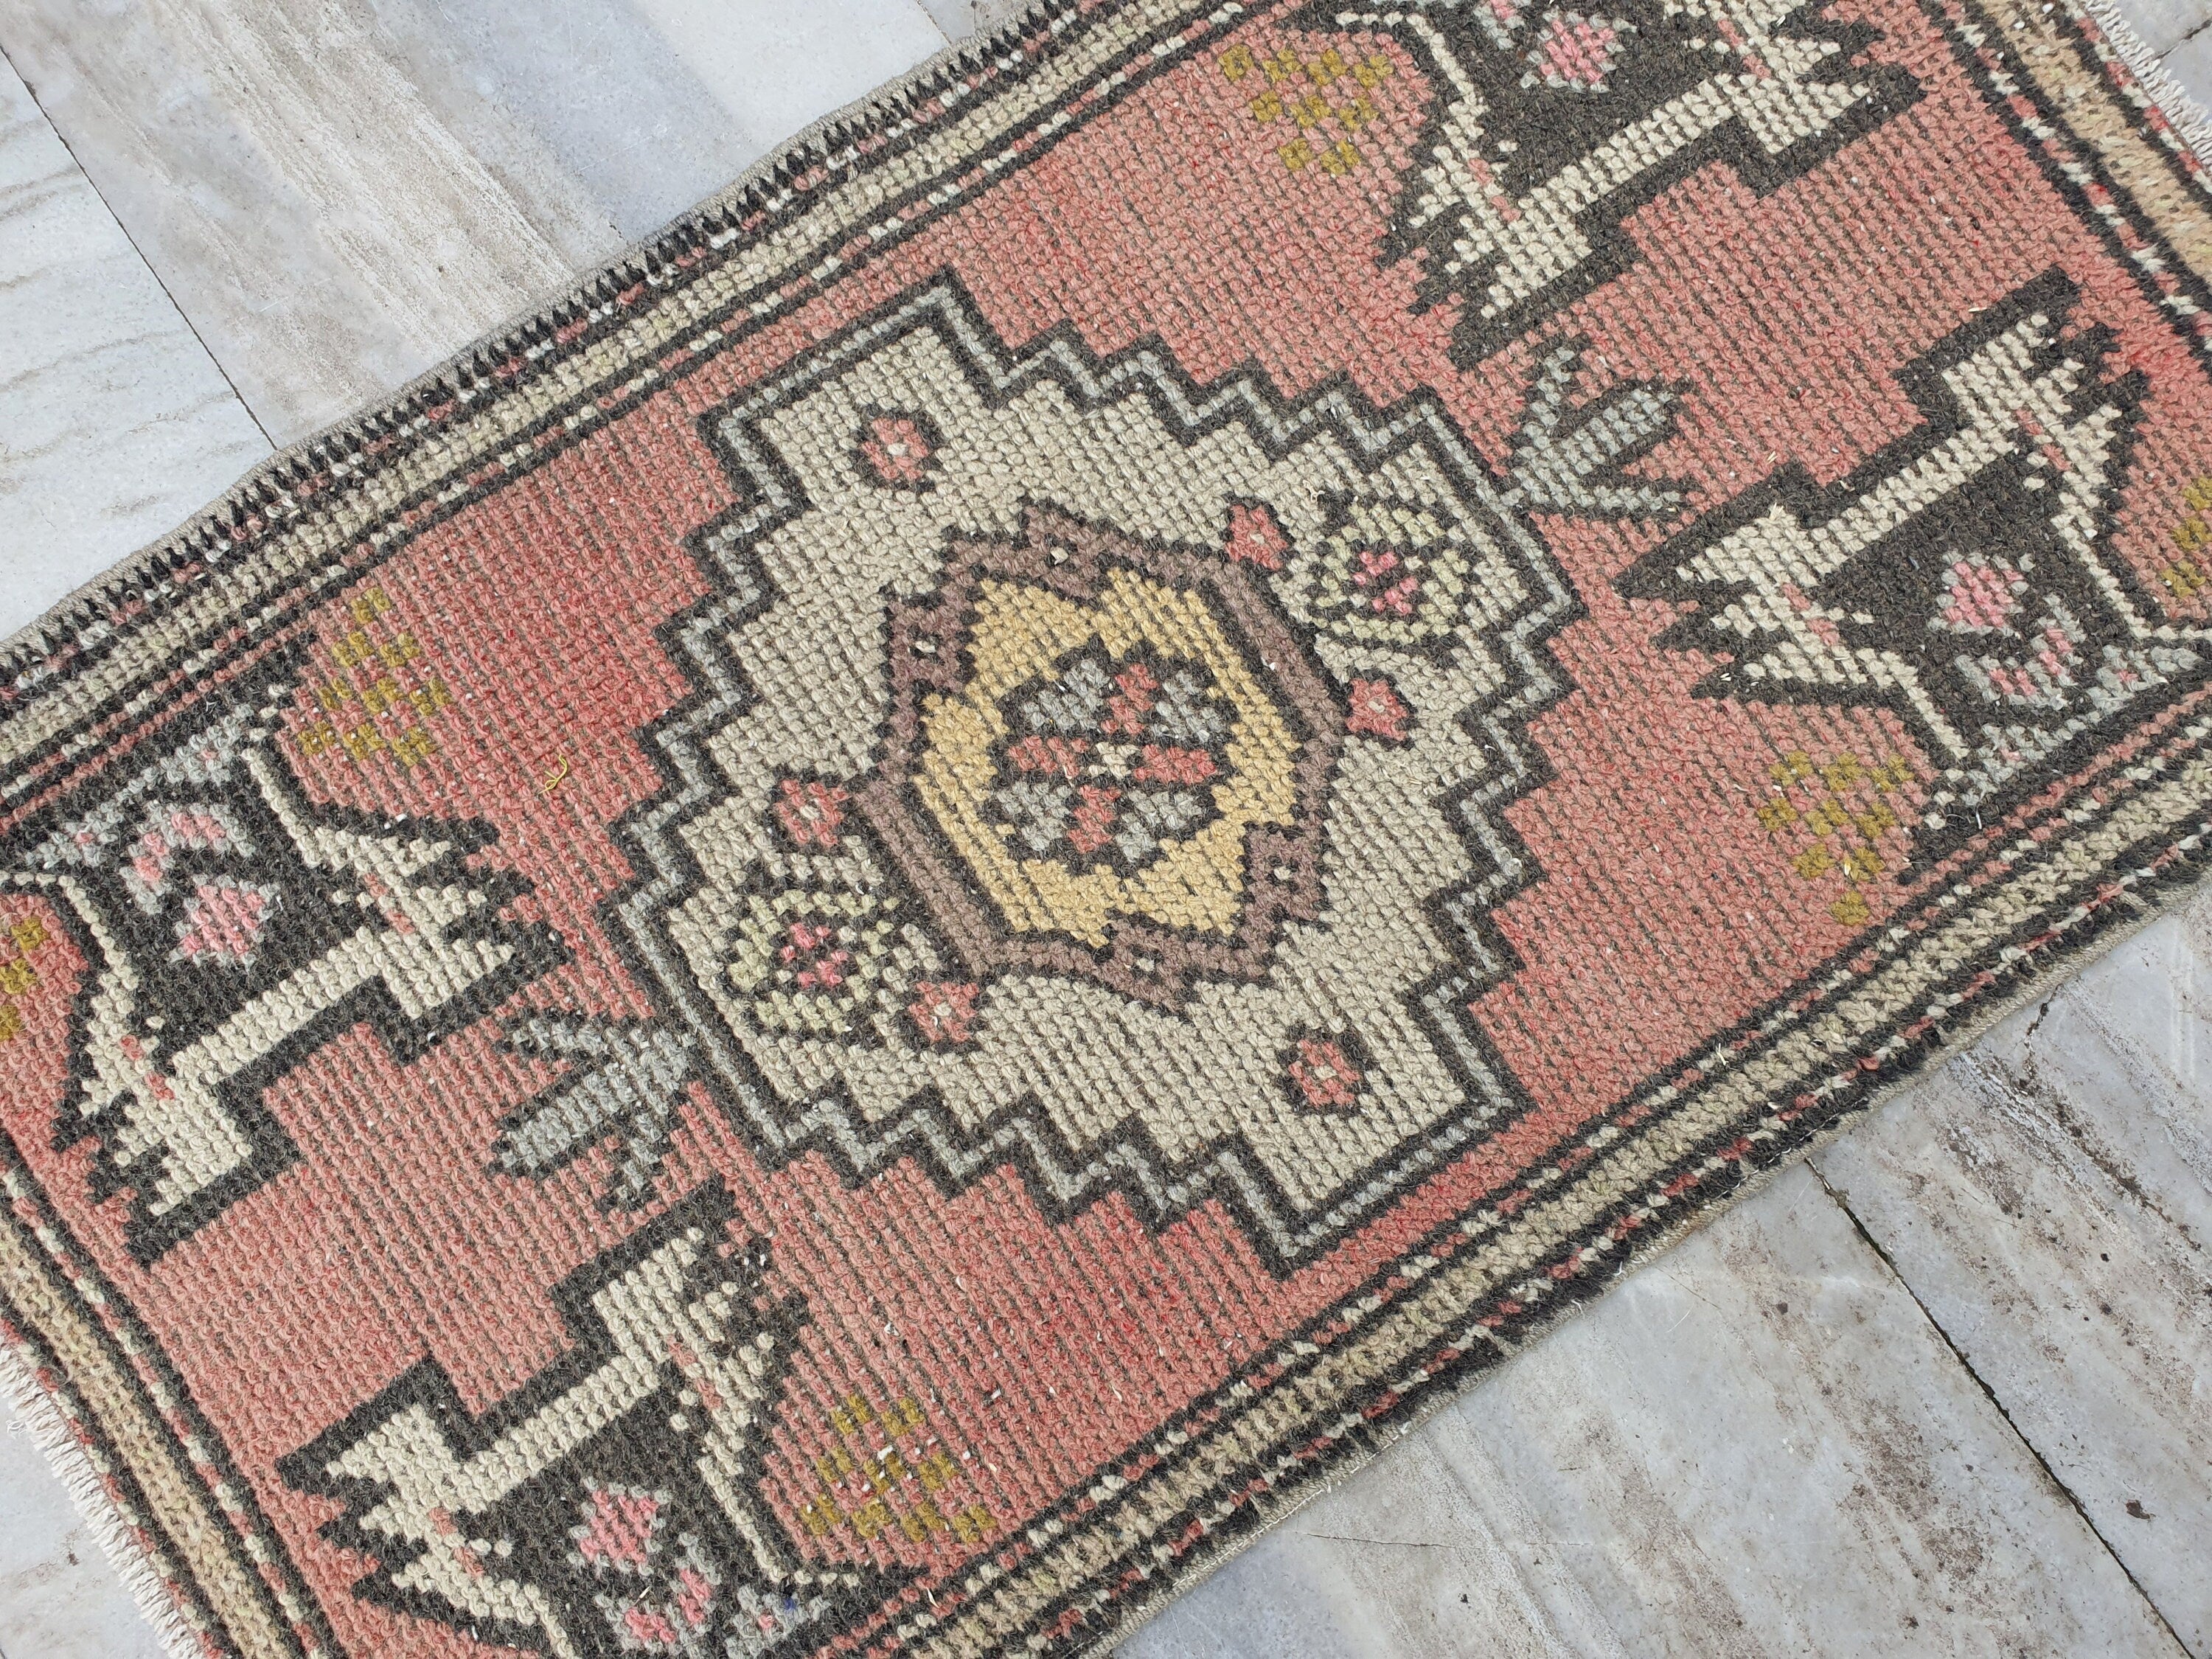 Small Turkish Rug, 2 ft 9 in x 1 ft 7 in, Pink, Green/Grey and Beige Faded Distressed Antique Style Mat